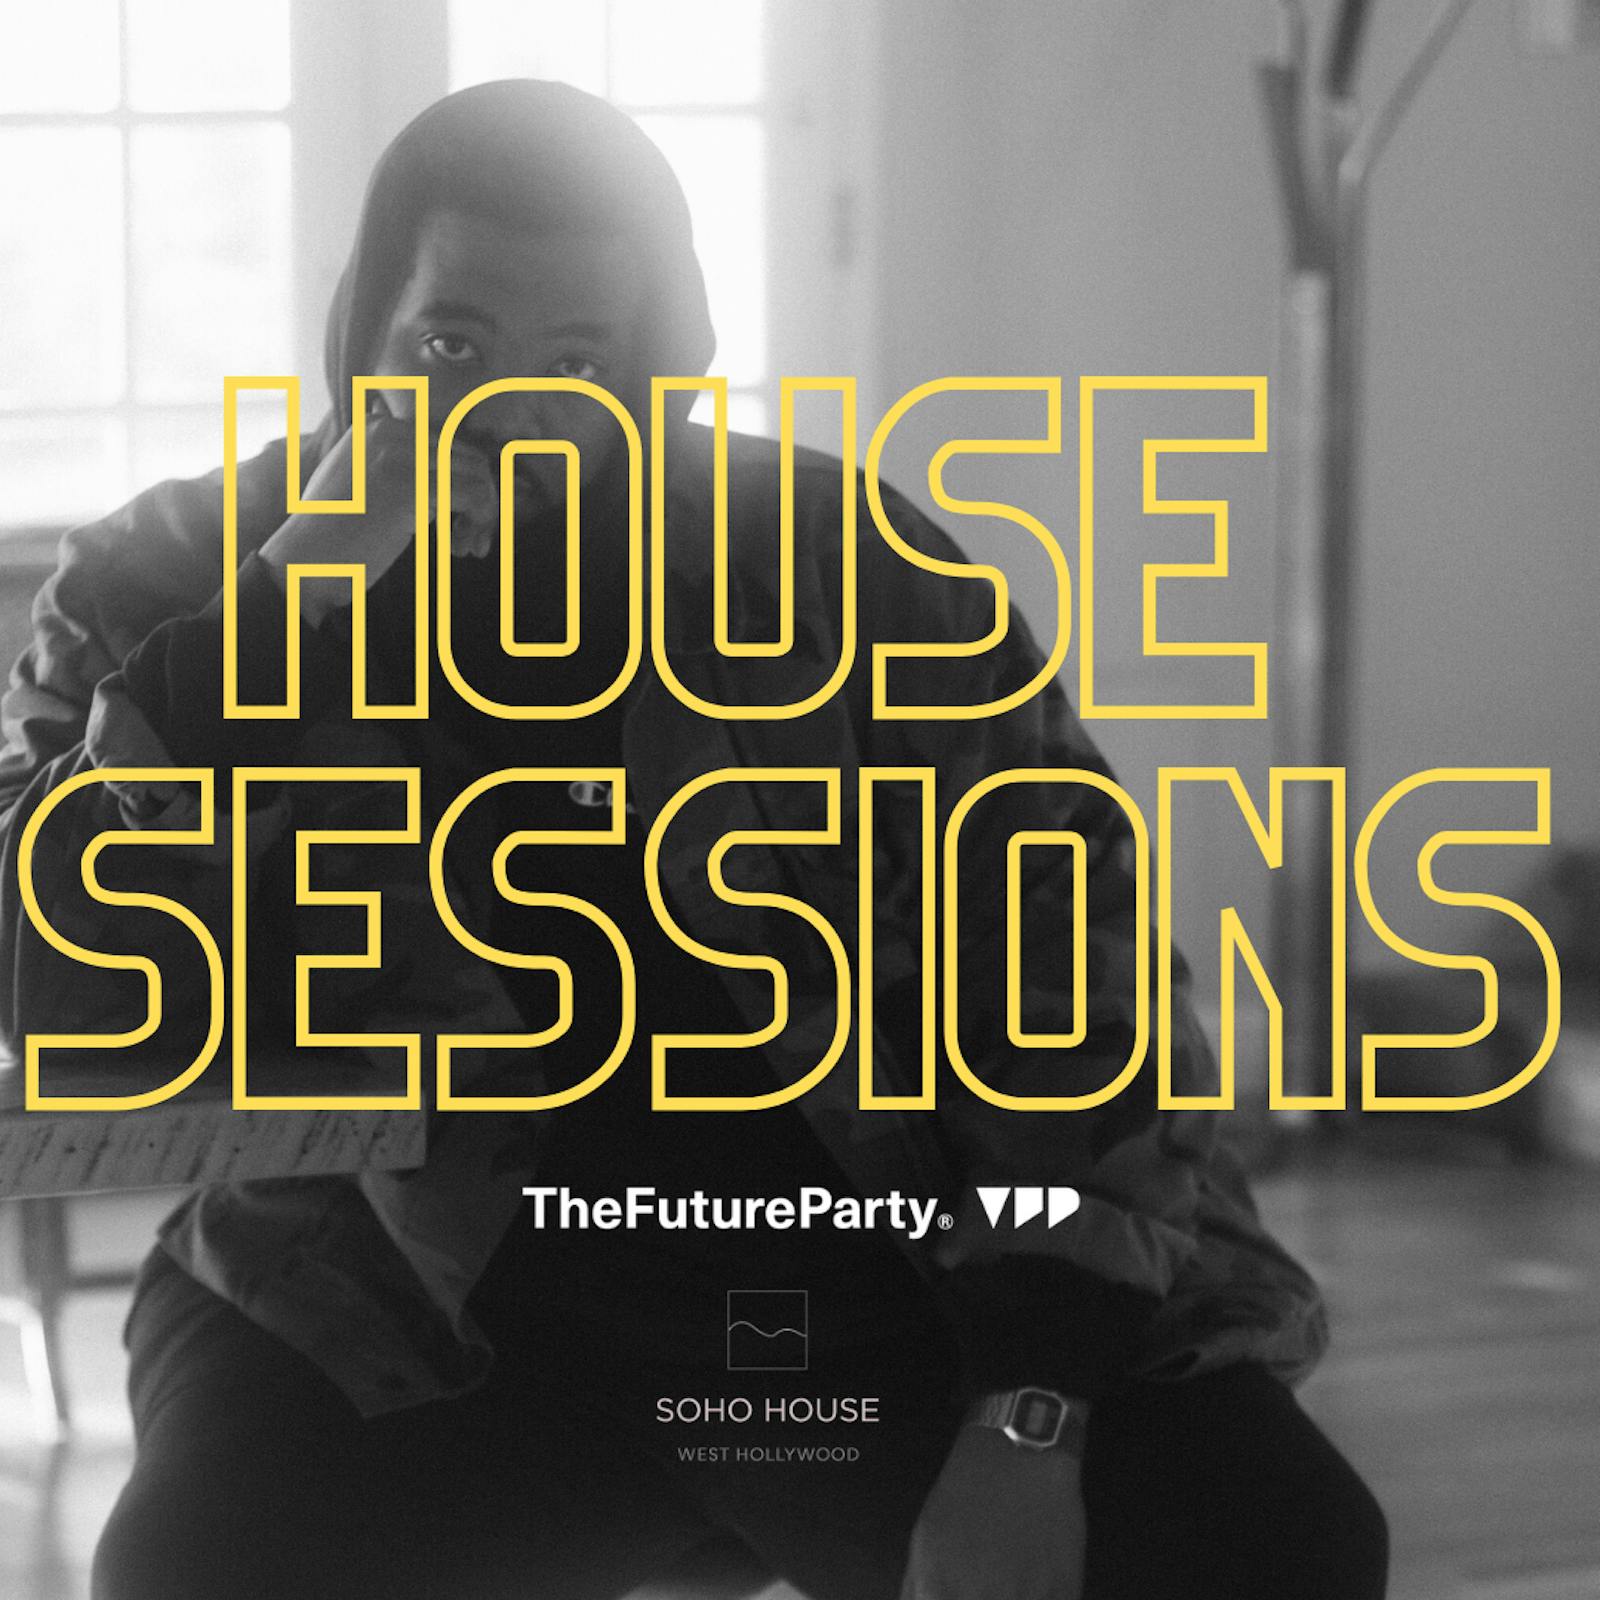 House Sessions with TheFutureParty at Soho House West Hollywood